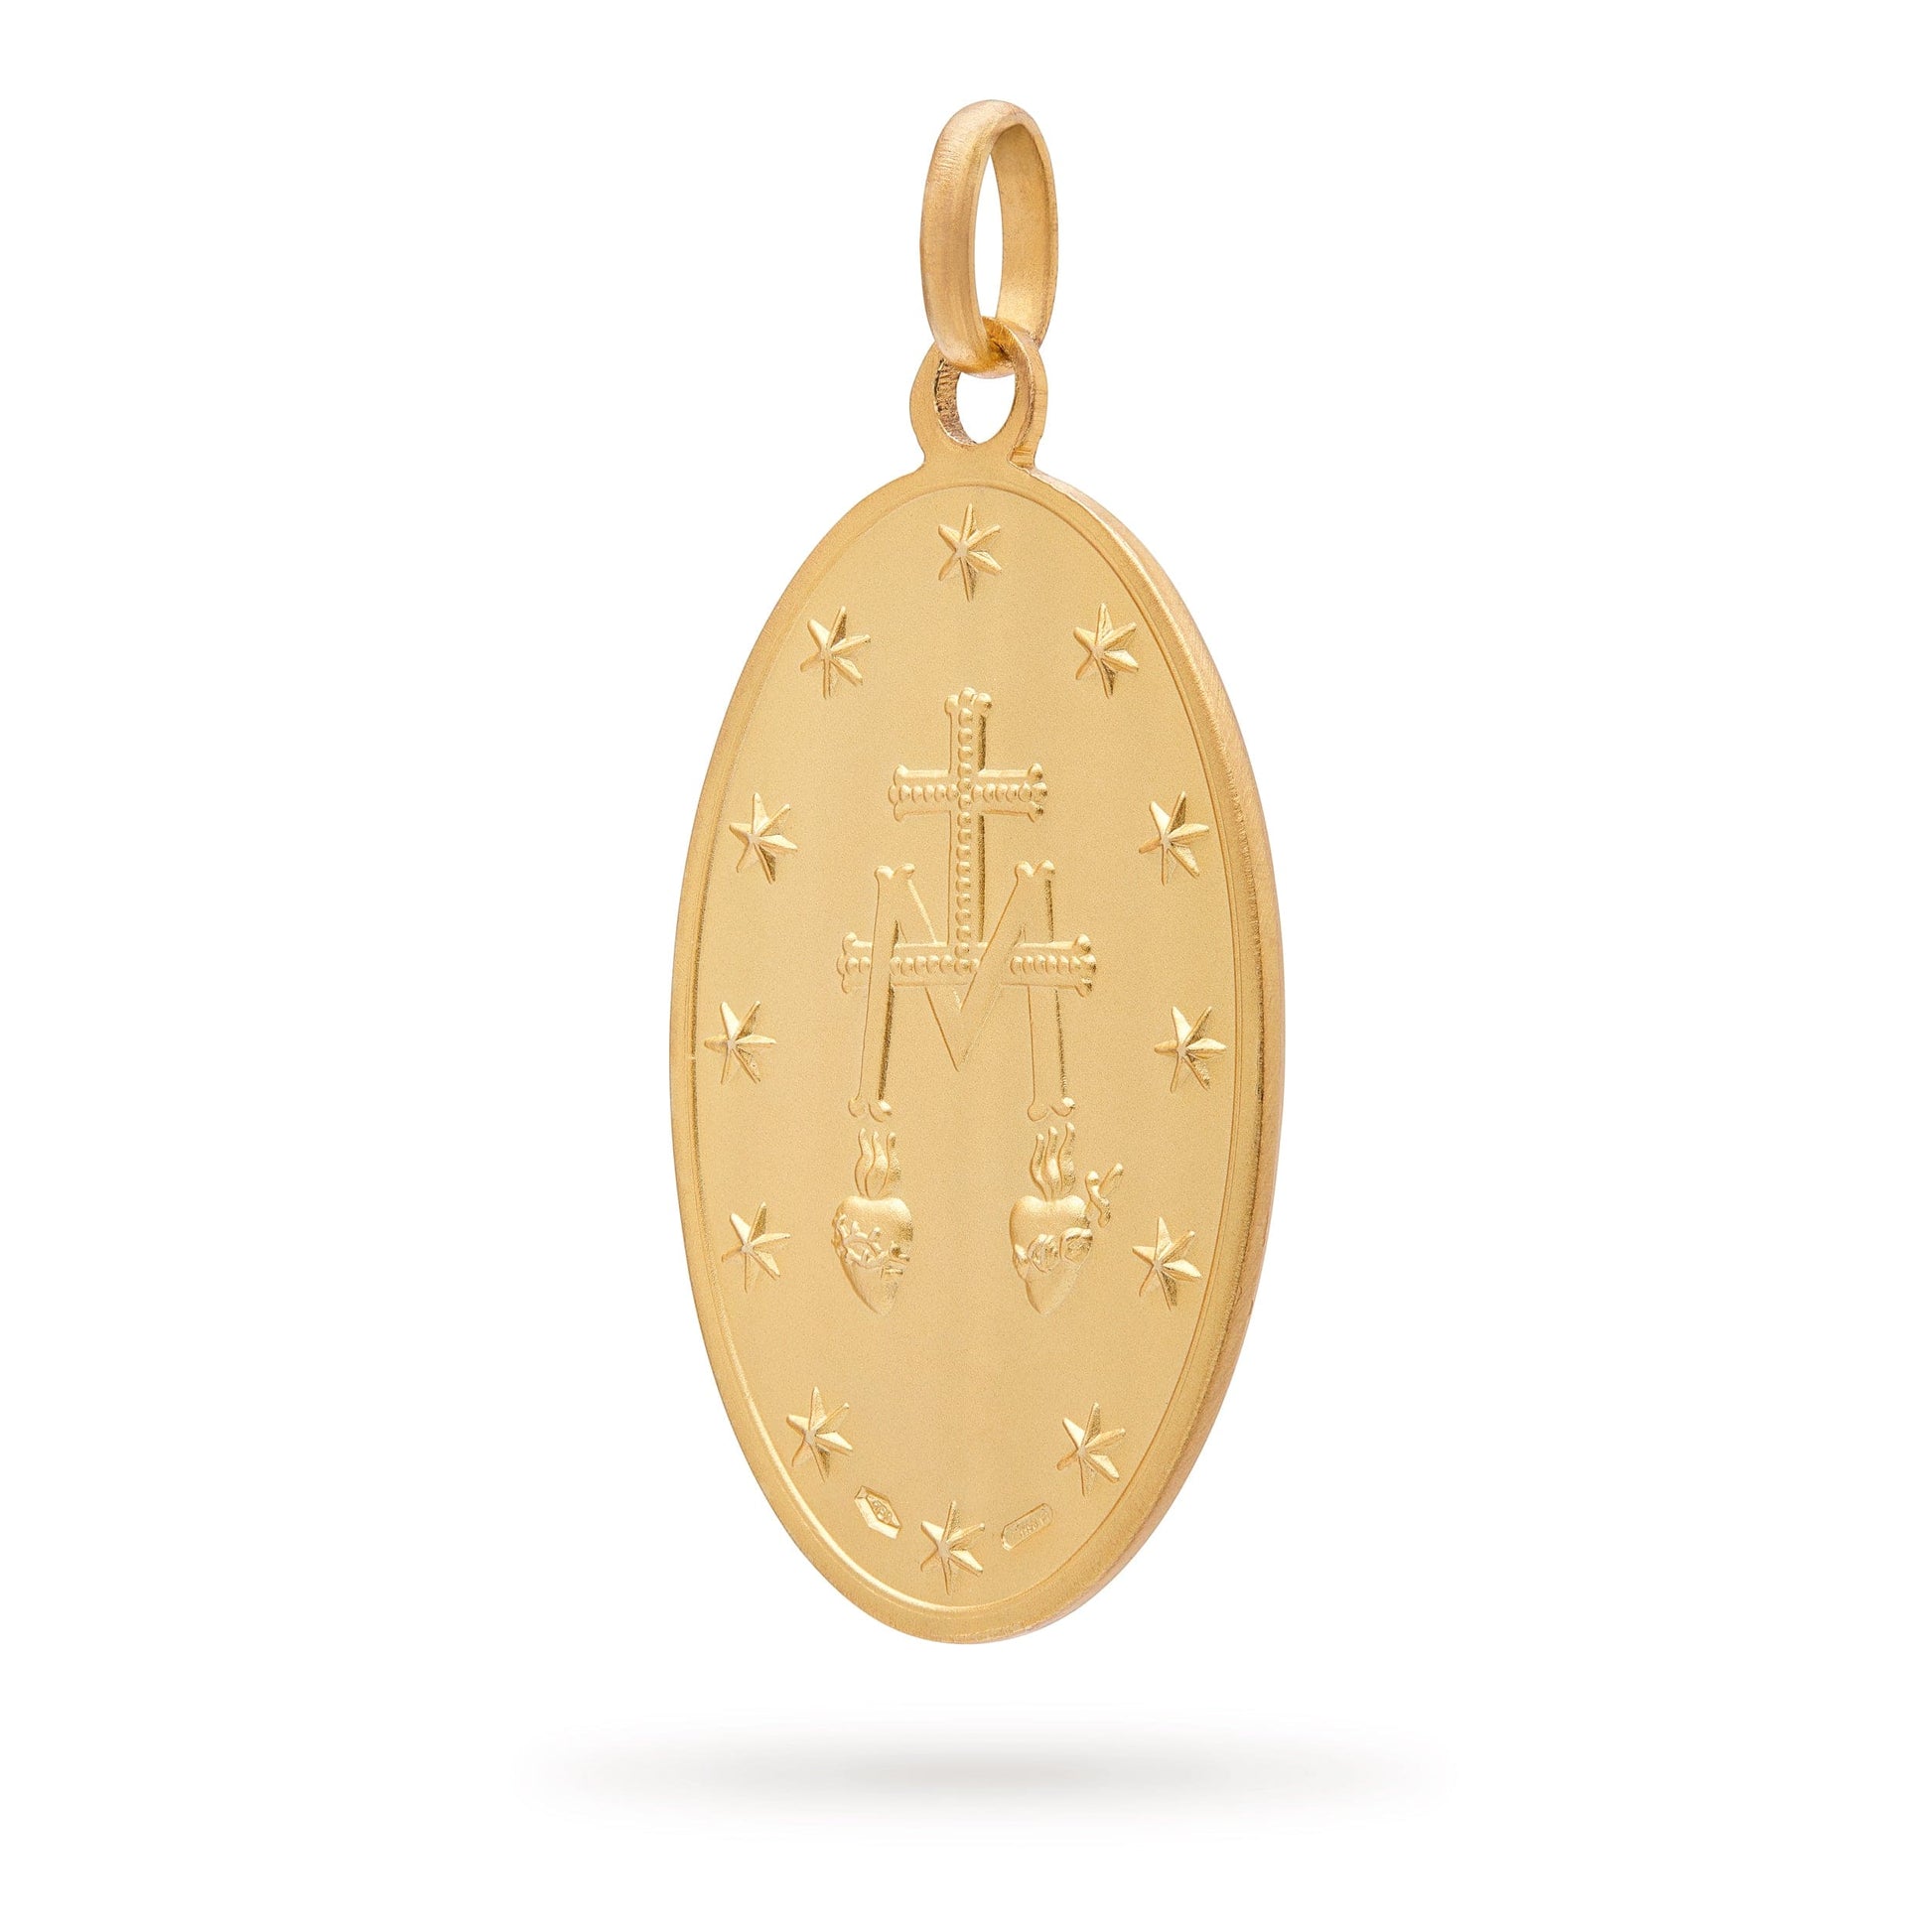 MONDO CATTOLICO Jewelry Miraculous Virgin Medal in Gold